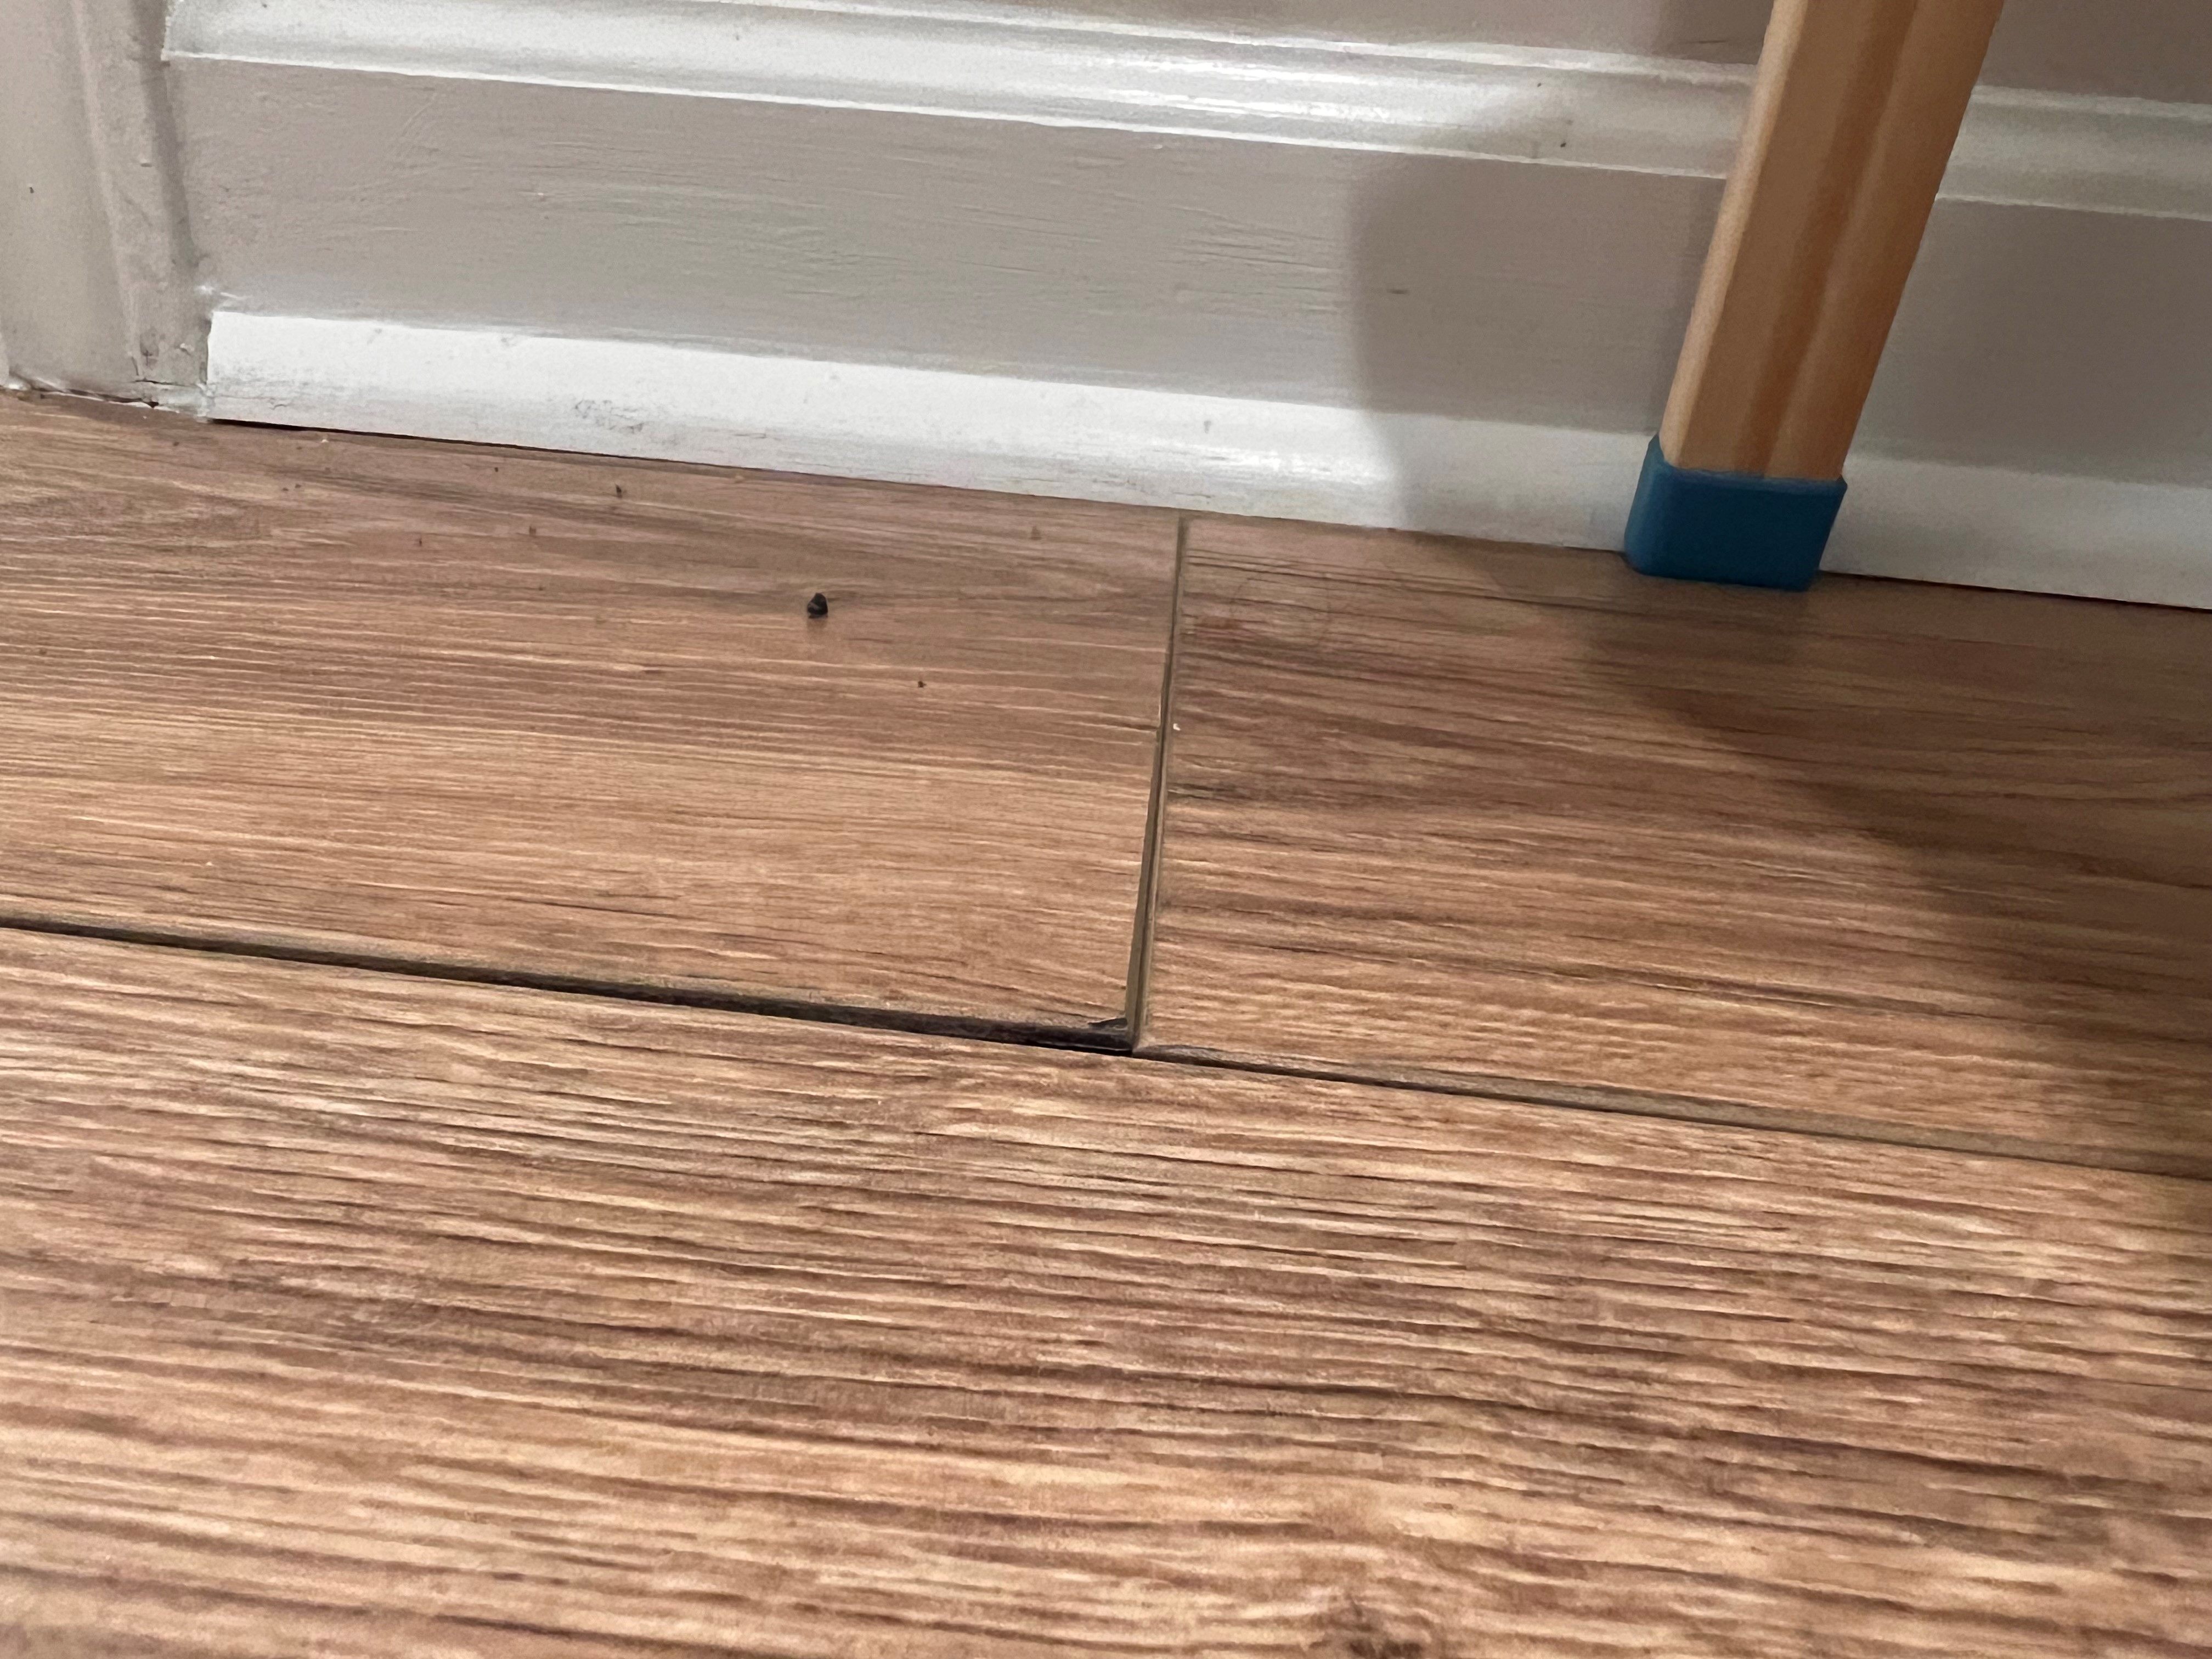 This plank has been like this since install